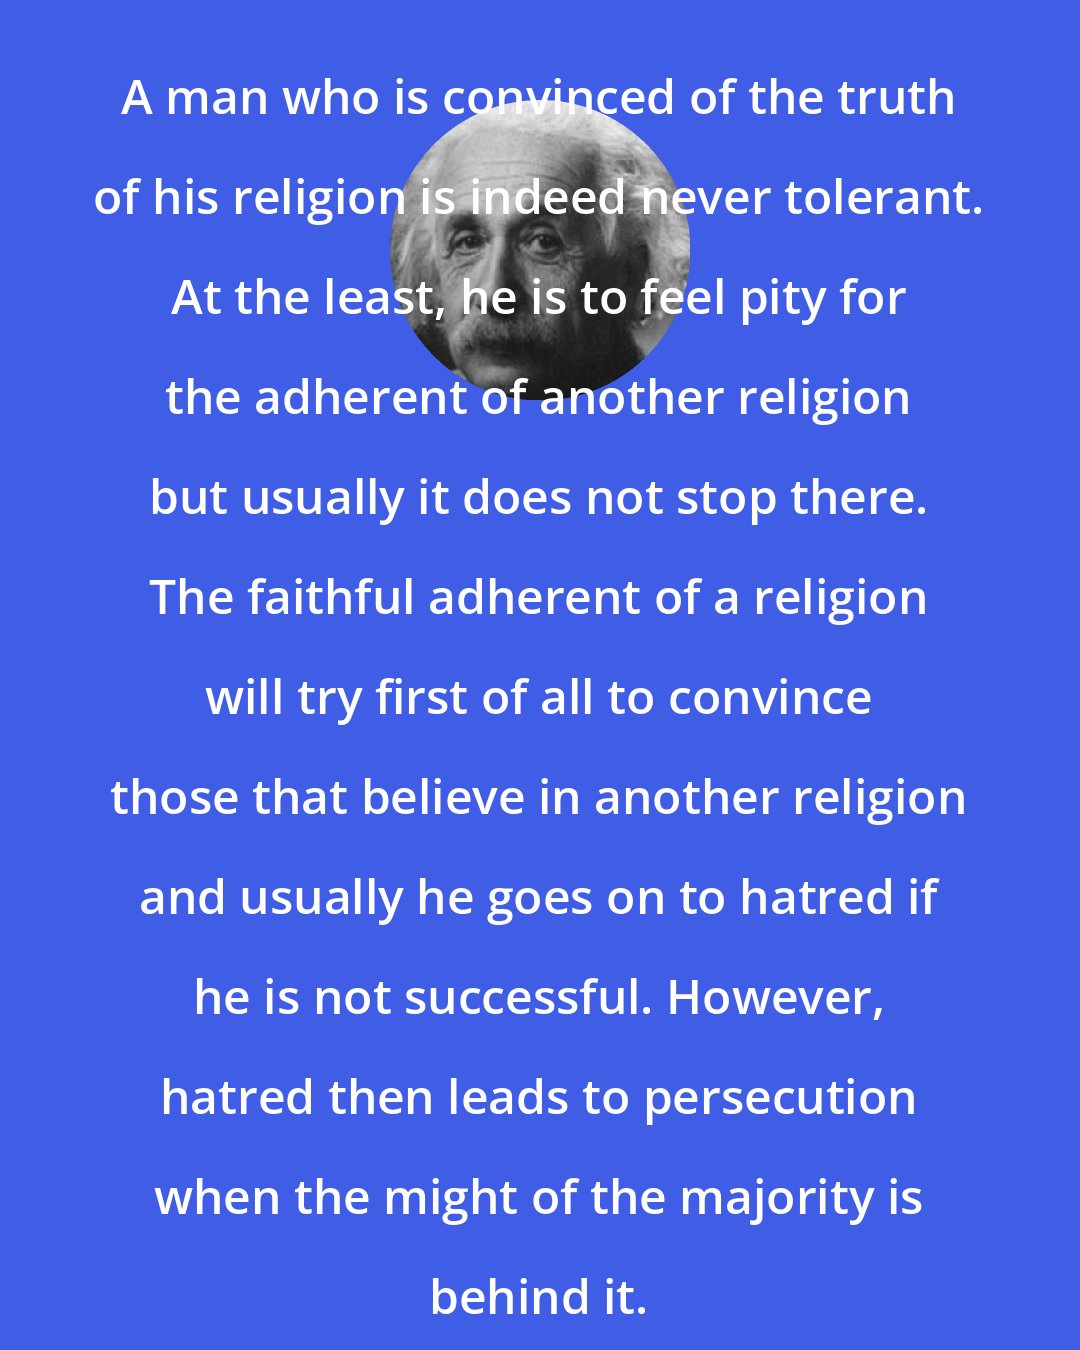 Albert Einstein: A man who is convinced of the truth of his religion is indeed never tolerant. At the least, he is to feel pity for the adherent of another religion but usually it does not stop there. The faithful adherent of a religion will try first of all to convince those that believe in another religion and usually he goes on to hatred if he is not successful. However, hatred then leads to persecution when the might of the majority is behind it.